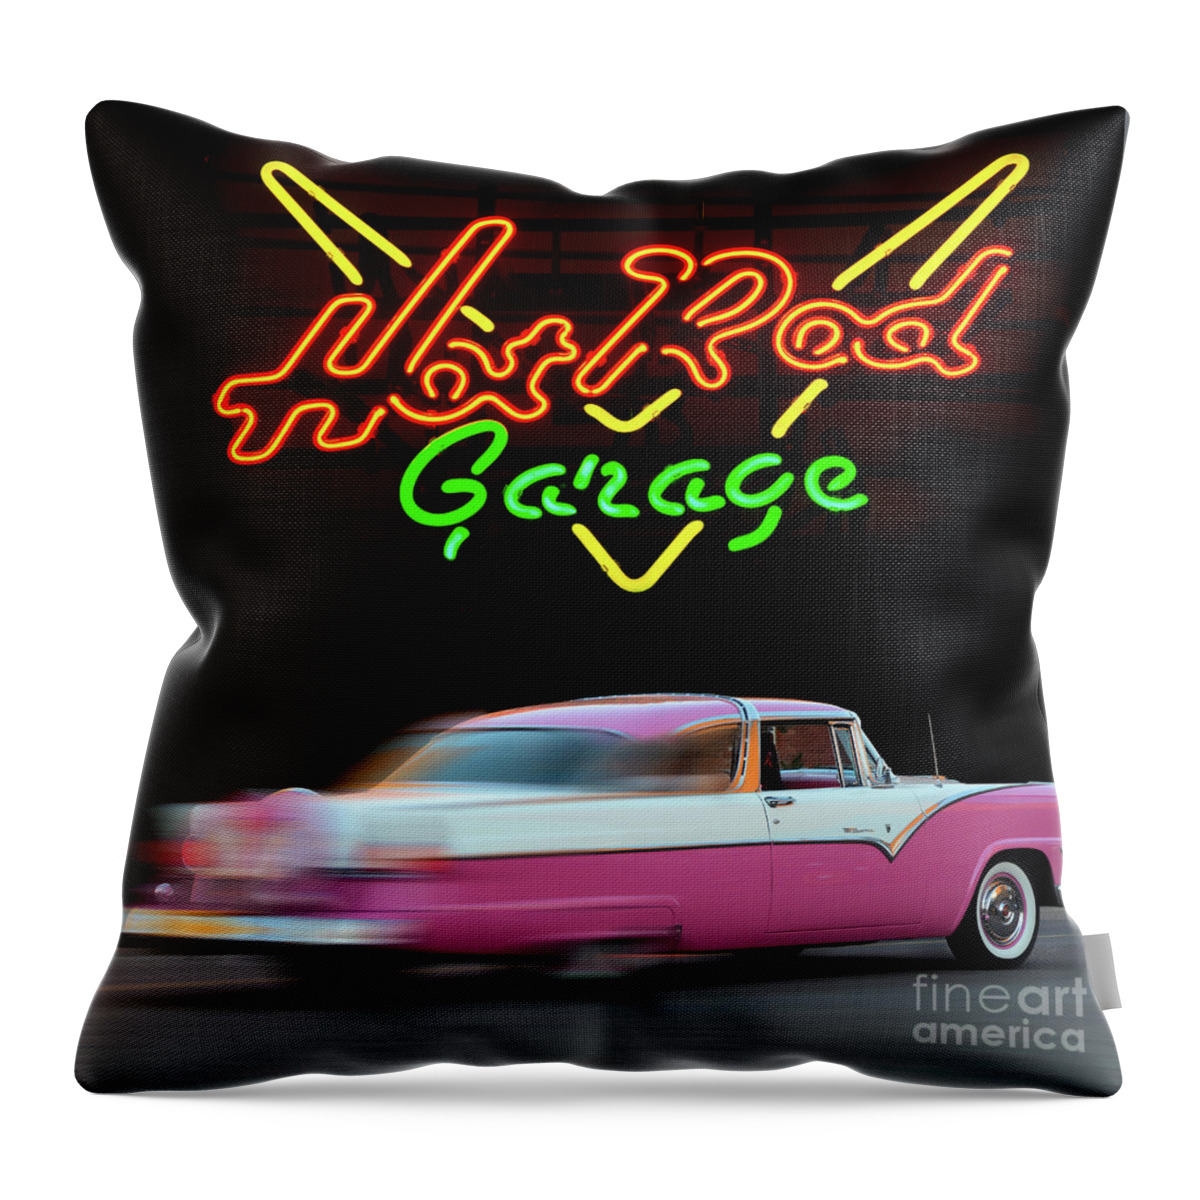 Hot Rod Garage Throw Pillow featuring the photograph Hot Rod Garage by Bob Christopher